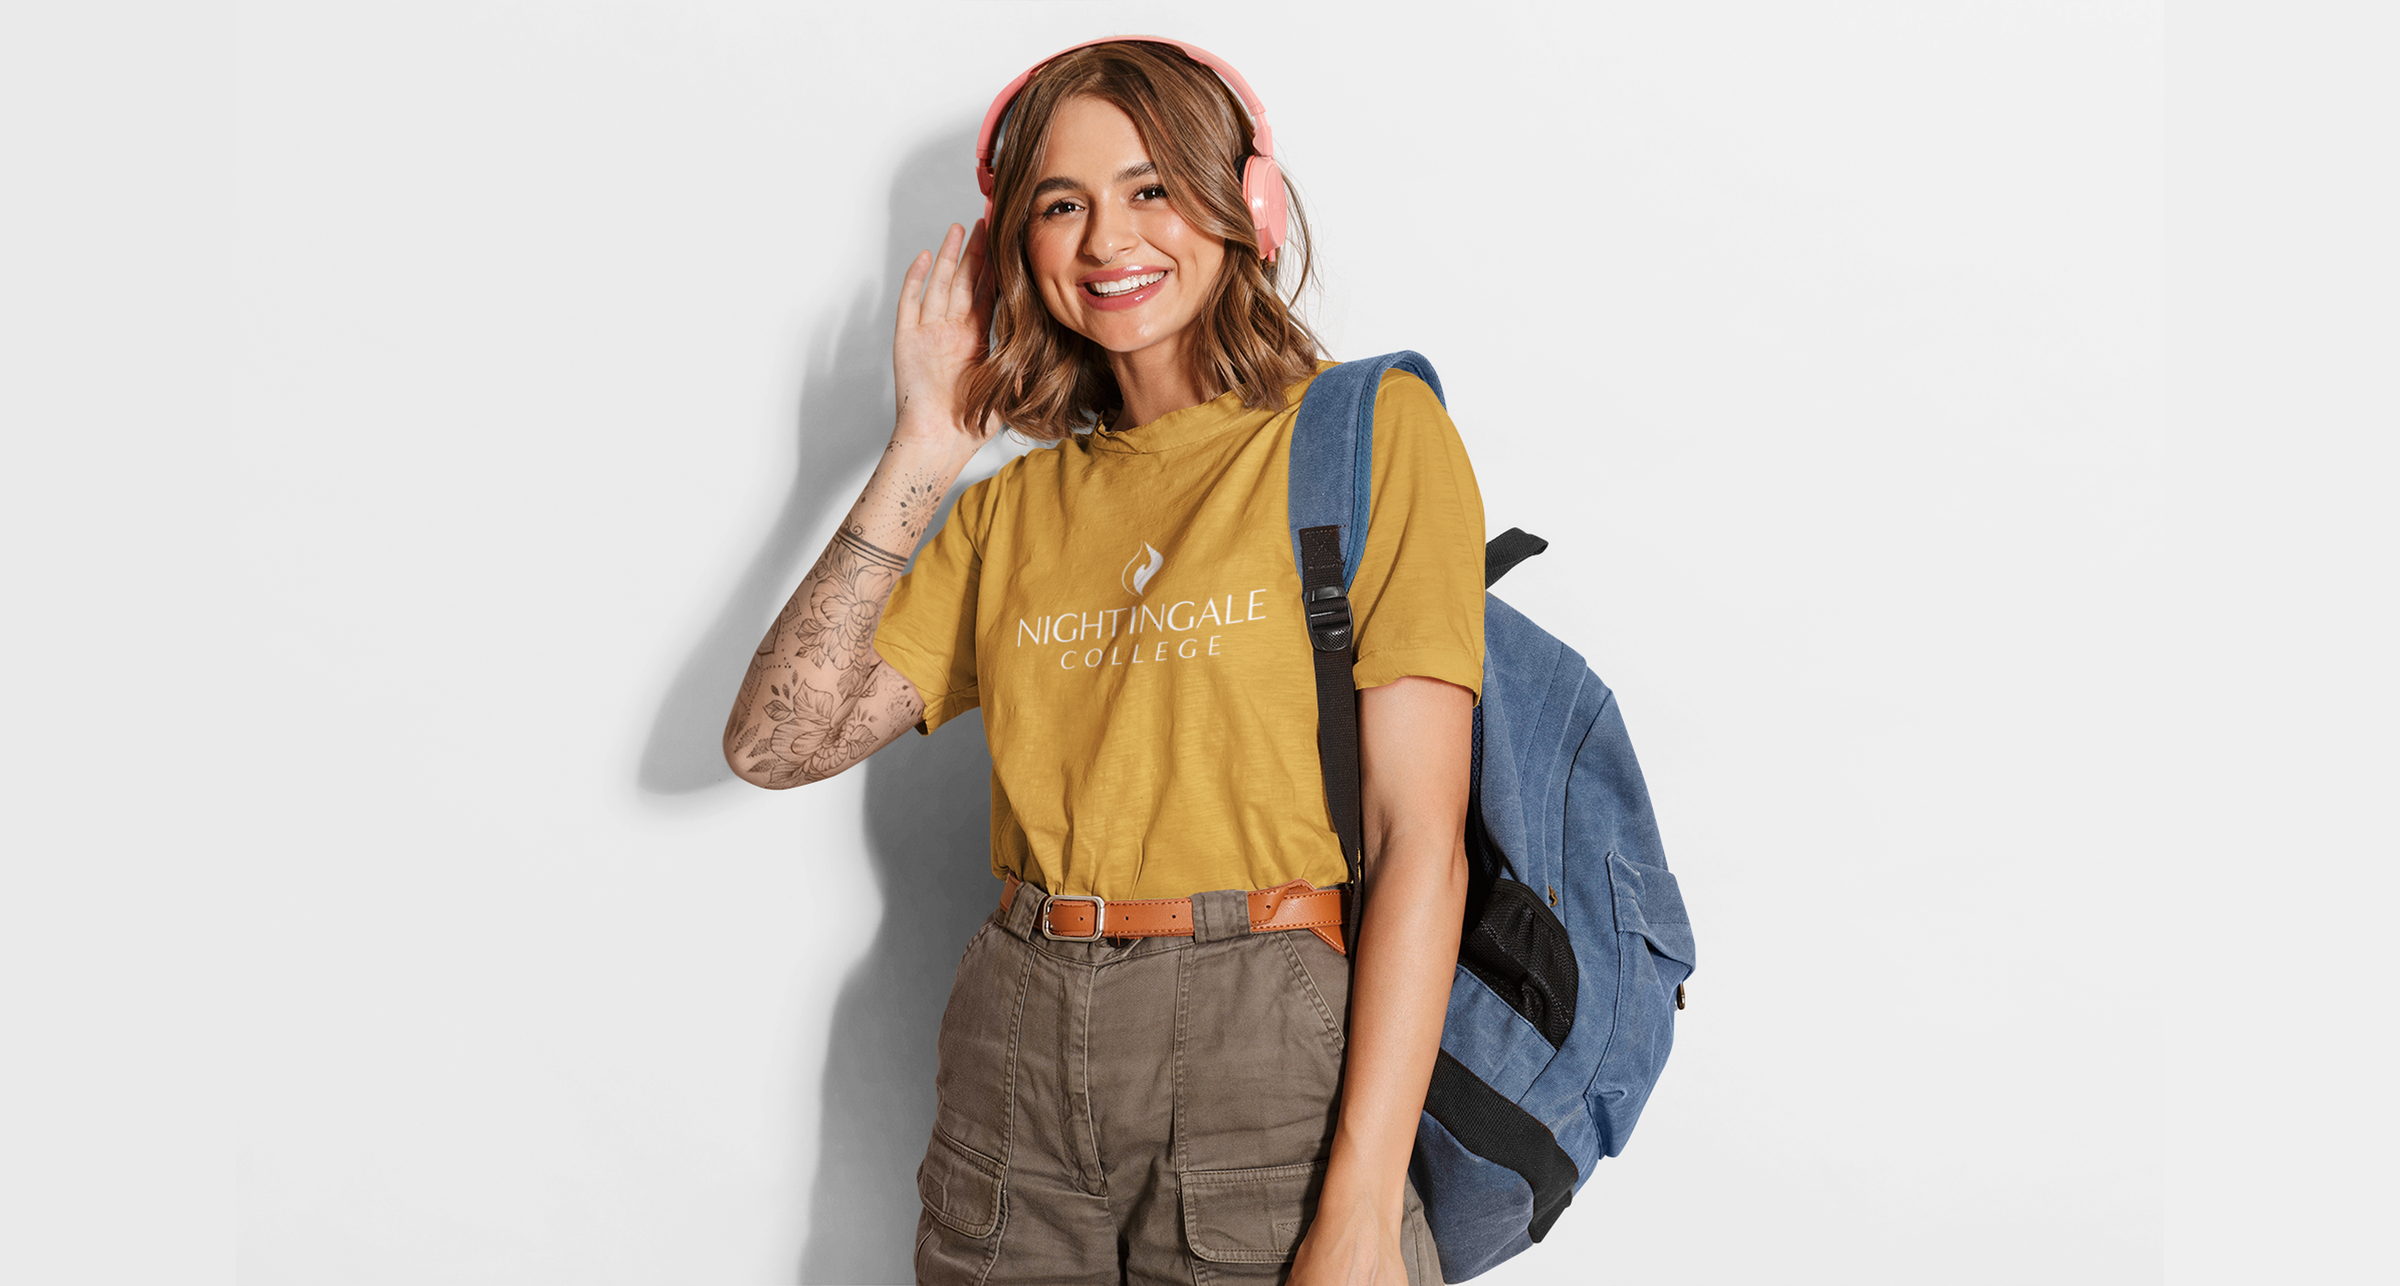 Girl in gold shirt with Nightingale College logo on front wearing a blue backpack with pink headphones in front of cream background